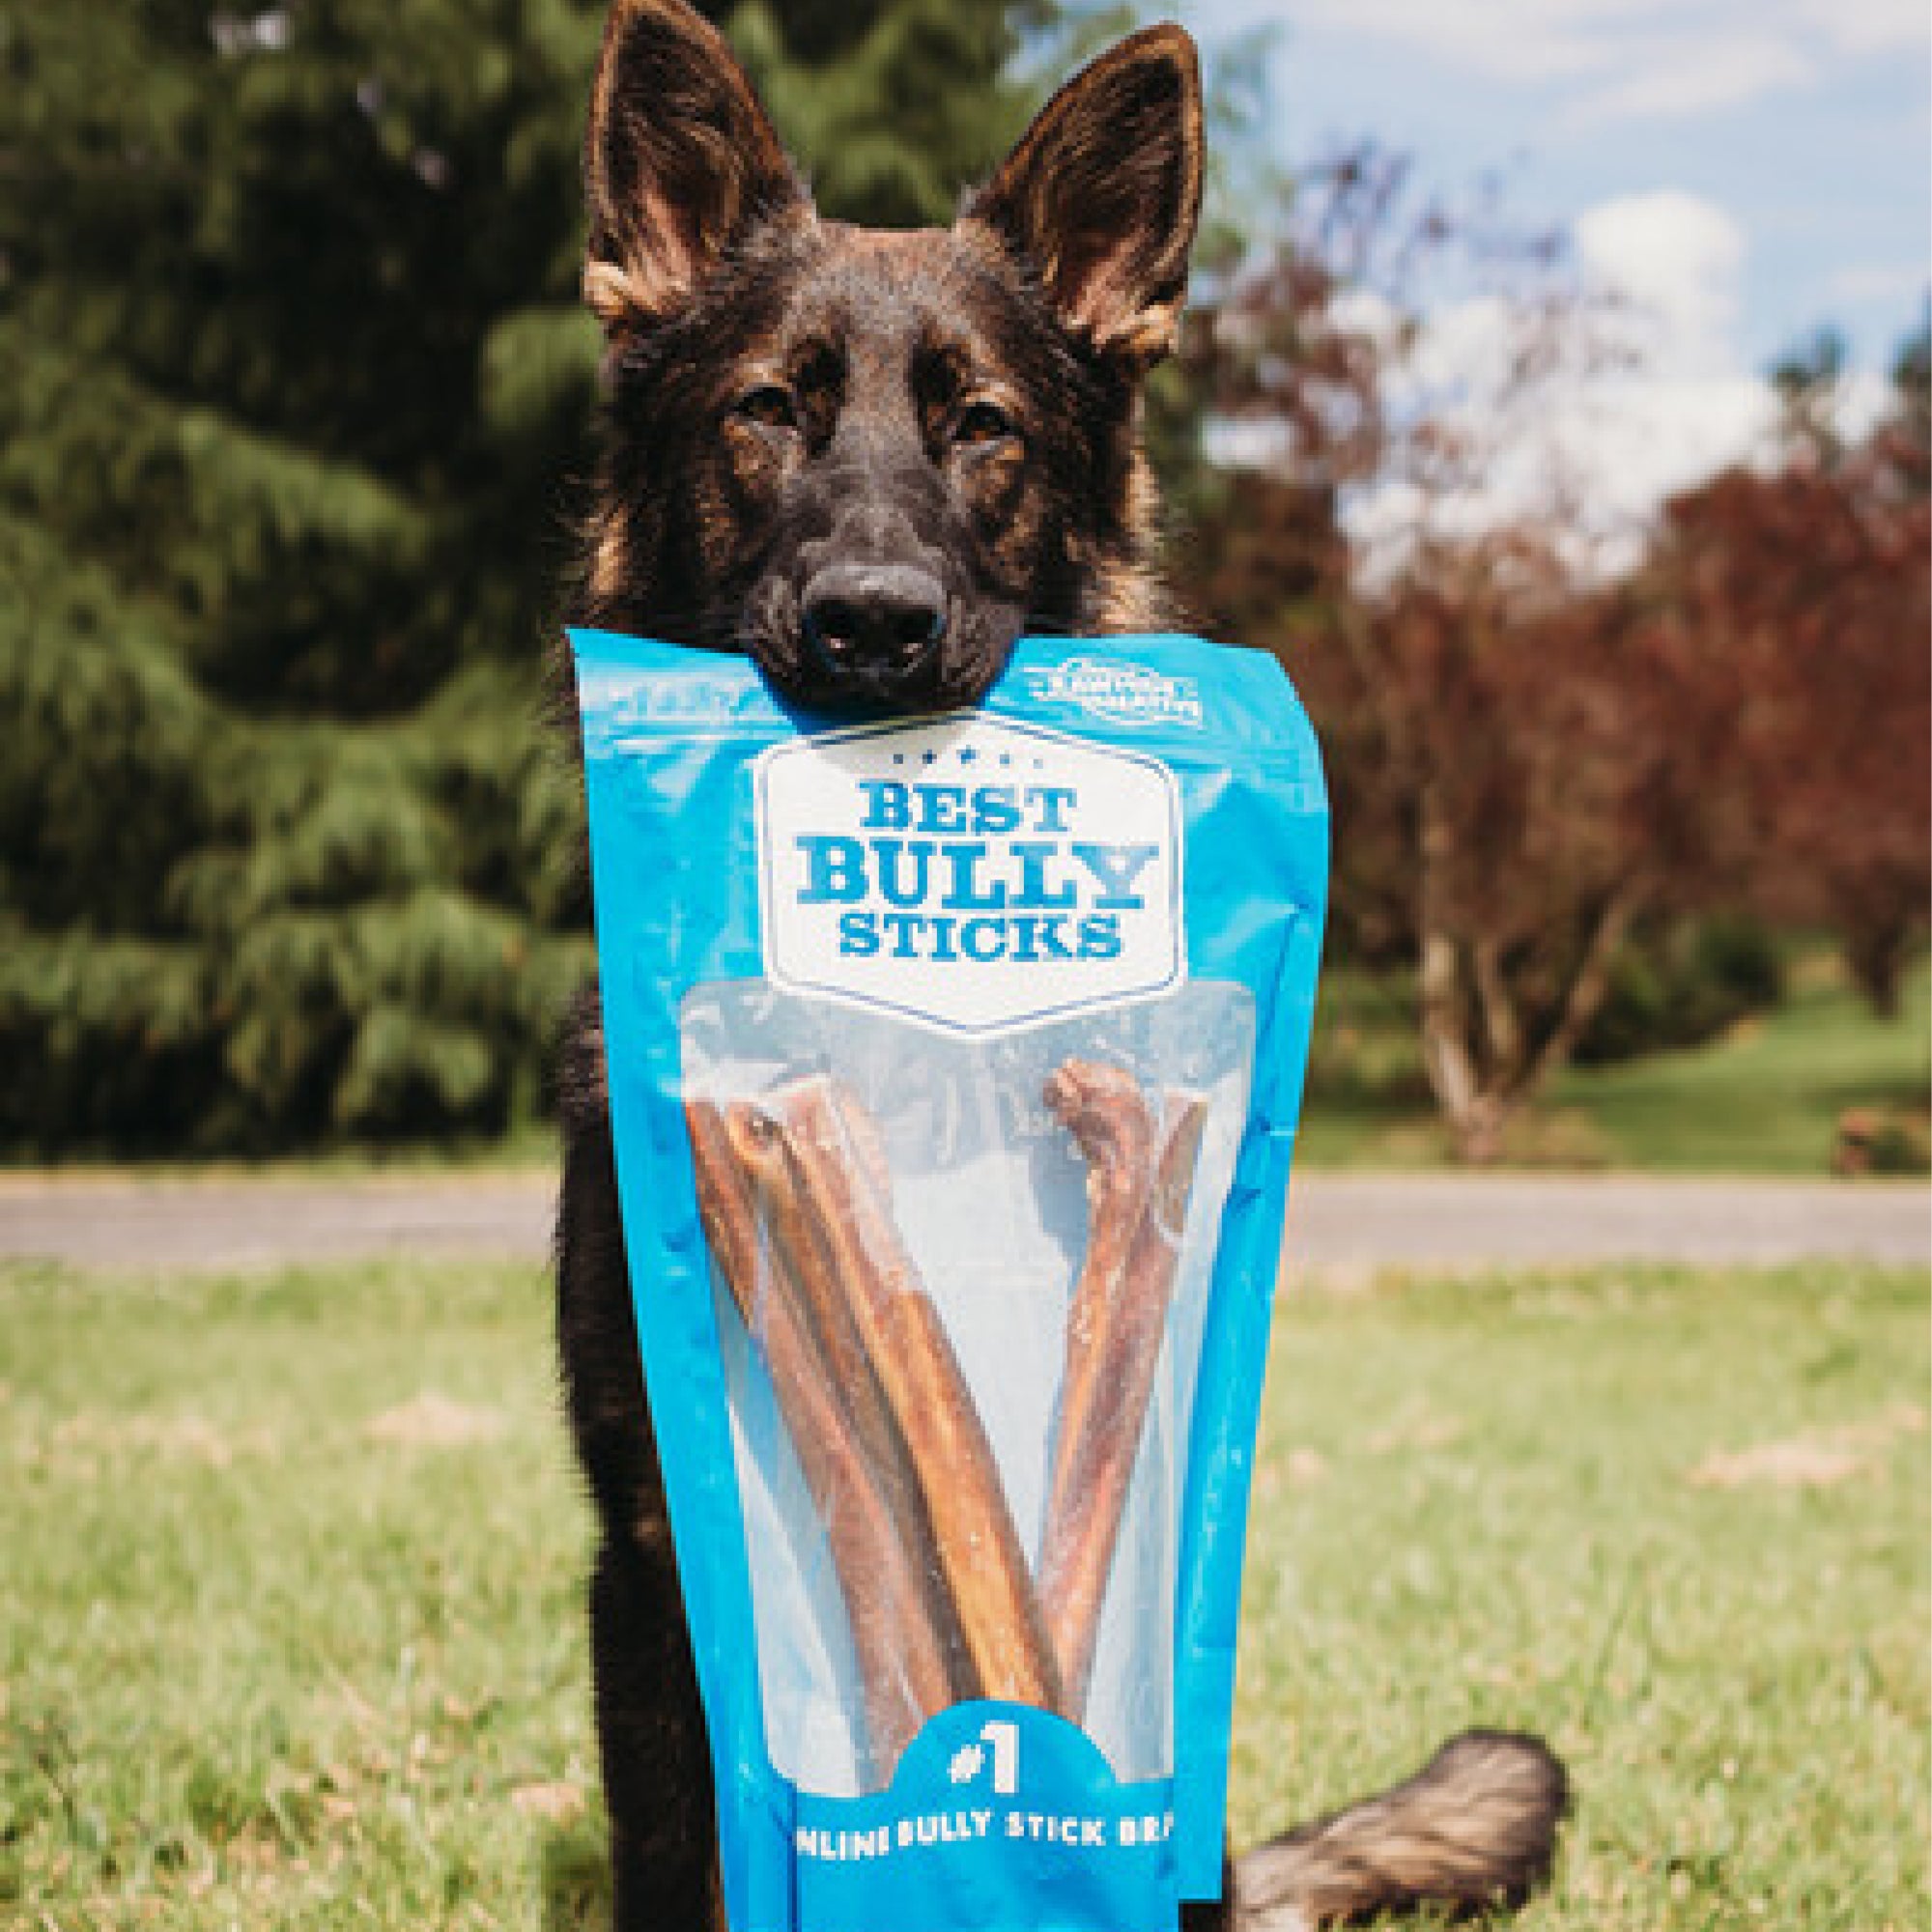 A dog holding a bag of Best Bully Sticks' 12-Inch Thick Bully Sticks.